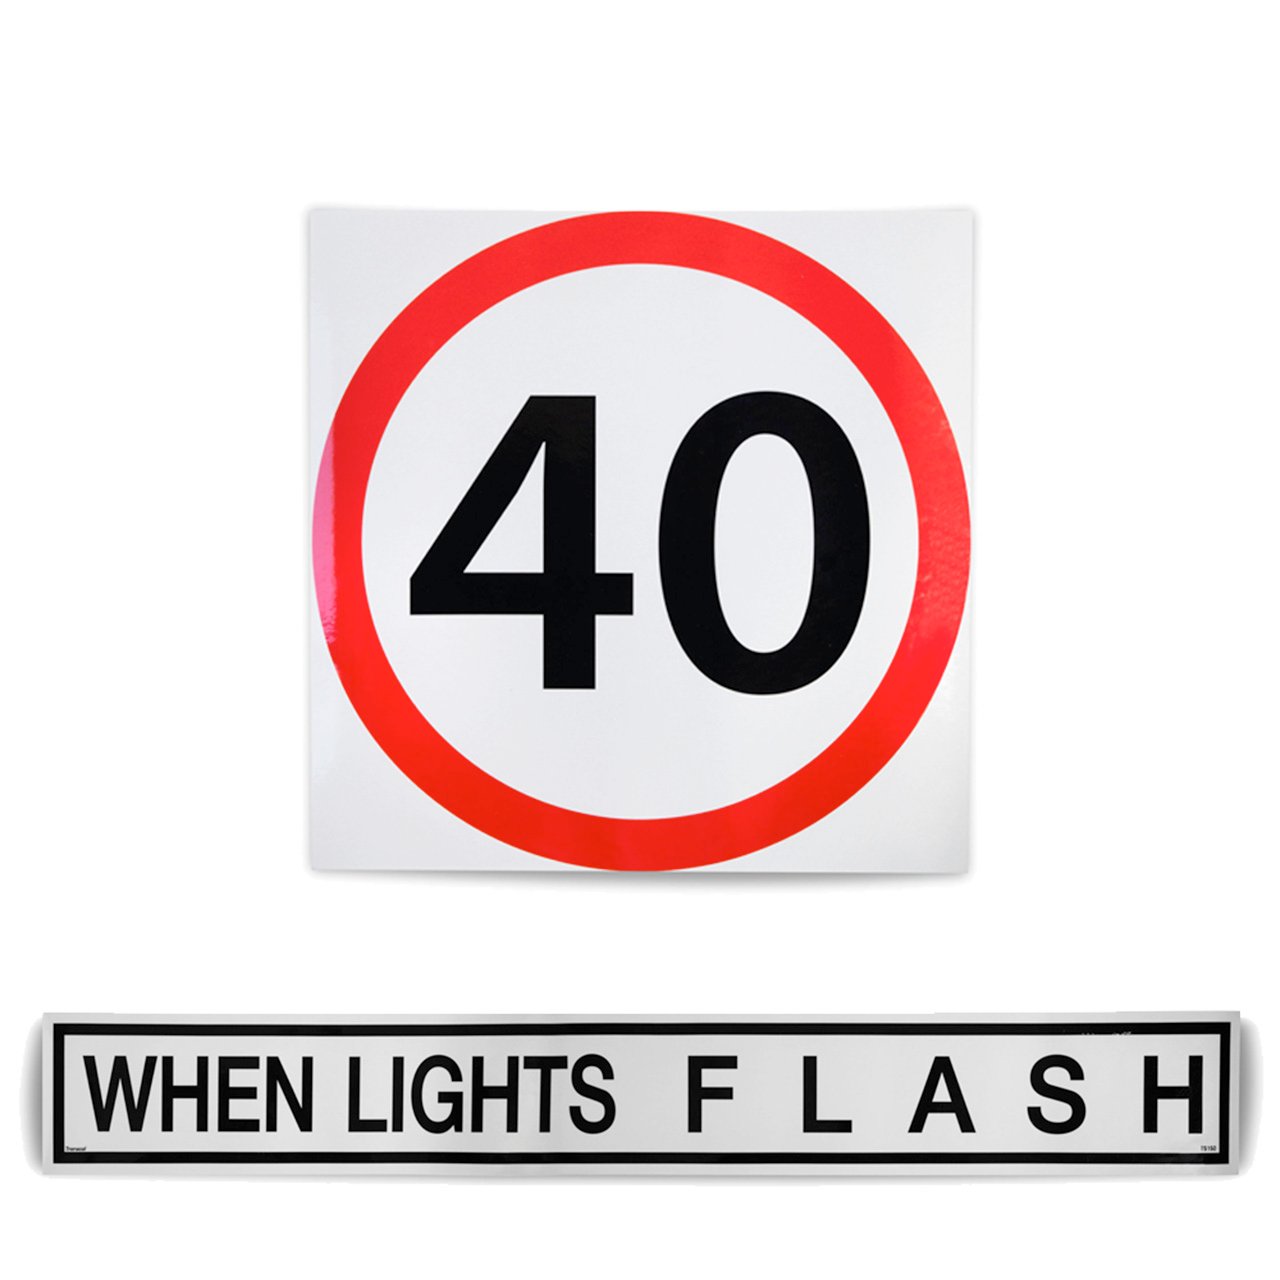 Photo of Tasmanian & New South Wales TS150 40km/h, large when lights flash signage